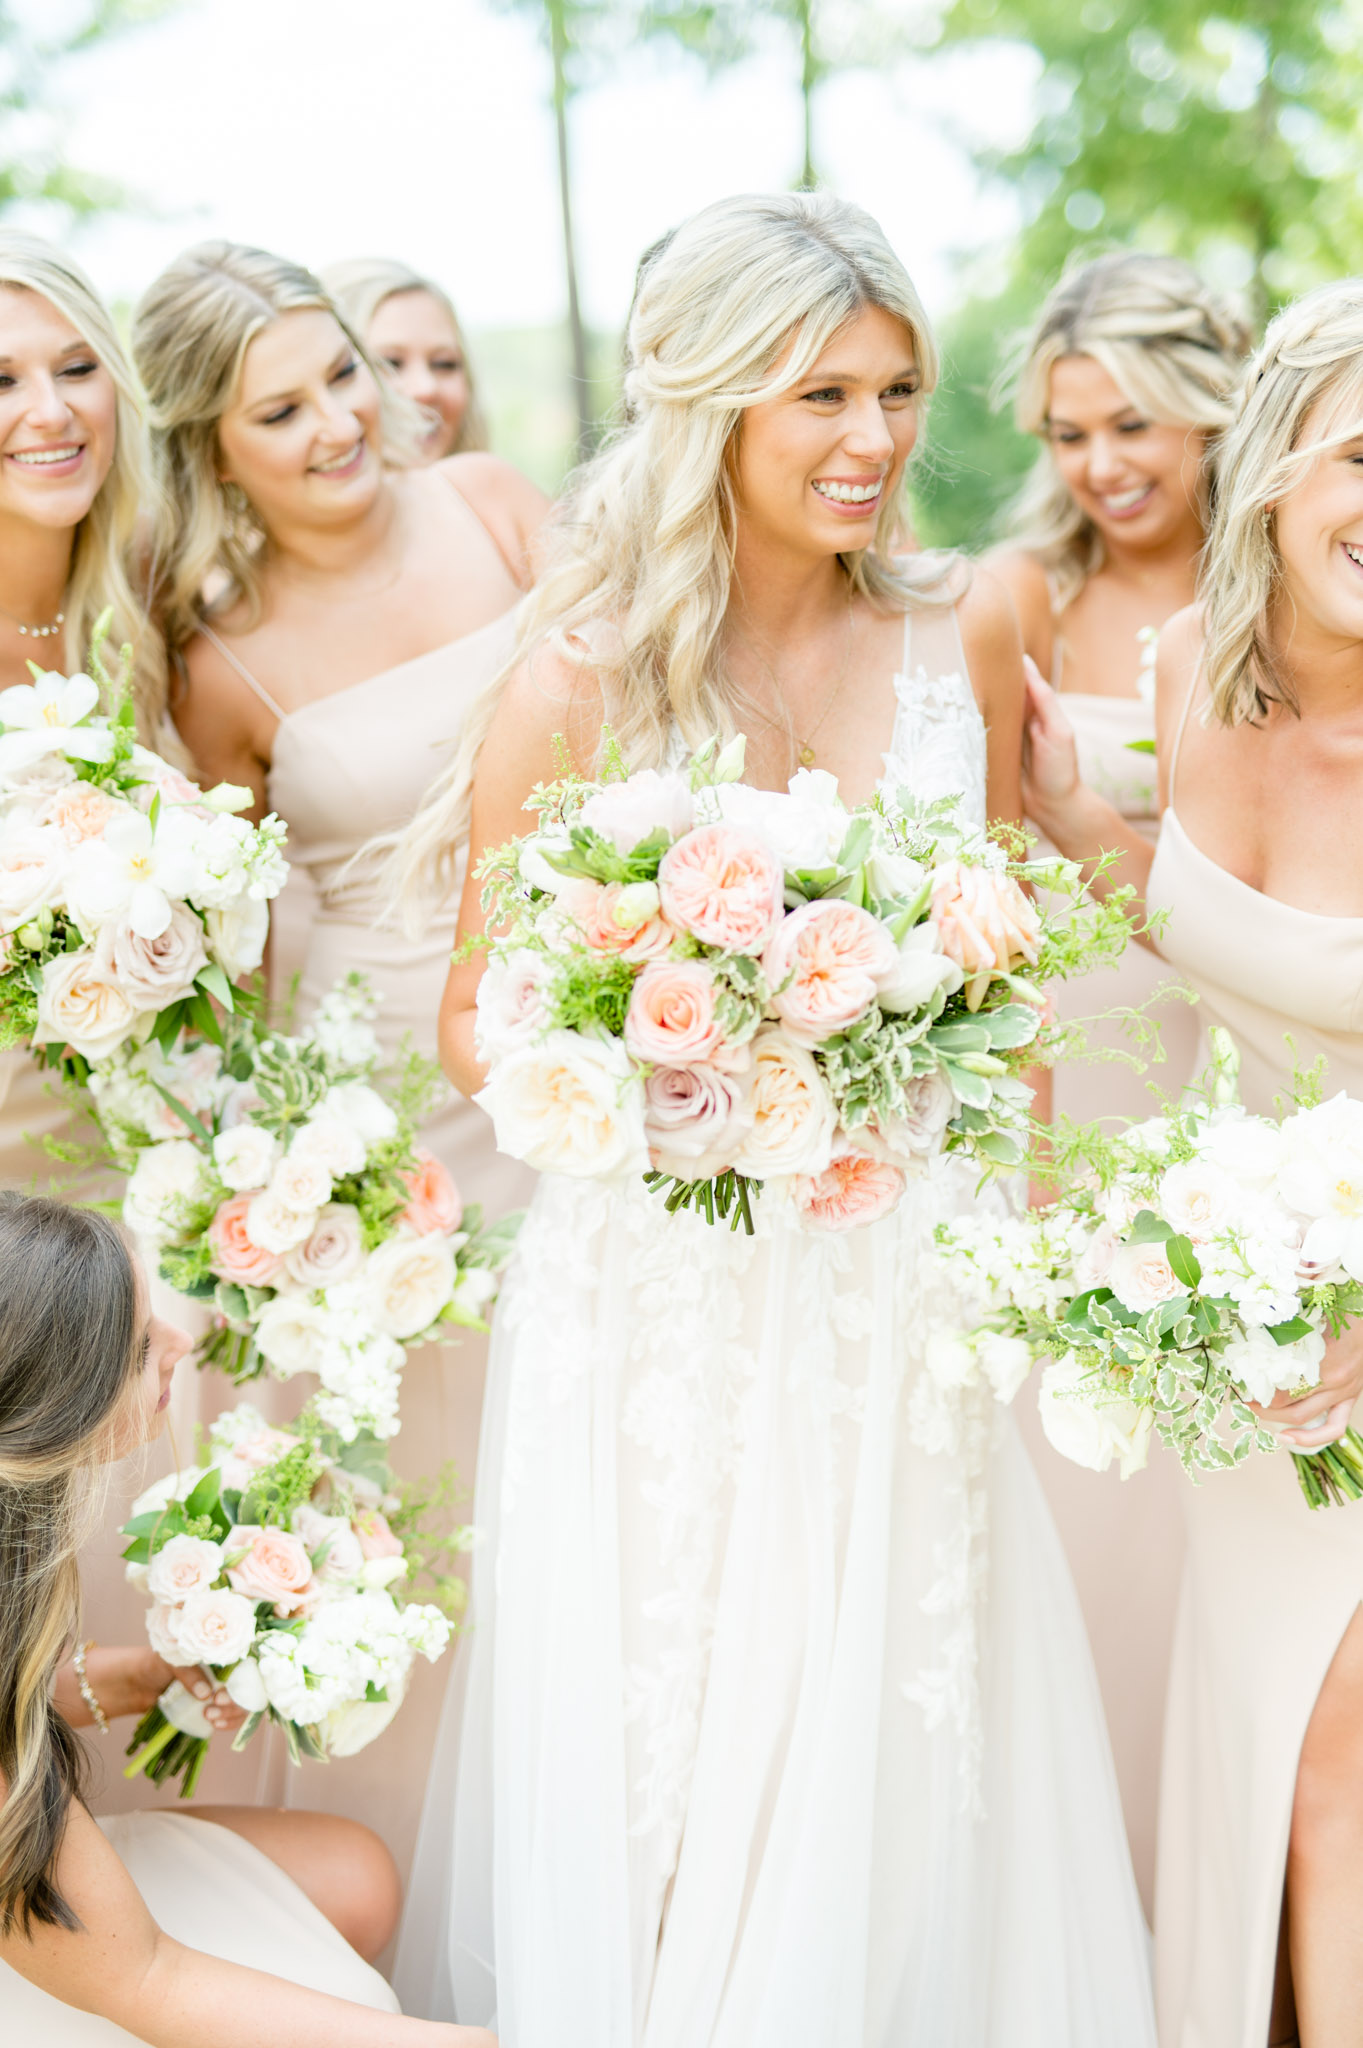 Bride is surrounded by smiling bridesmaids.